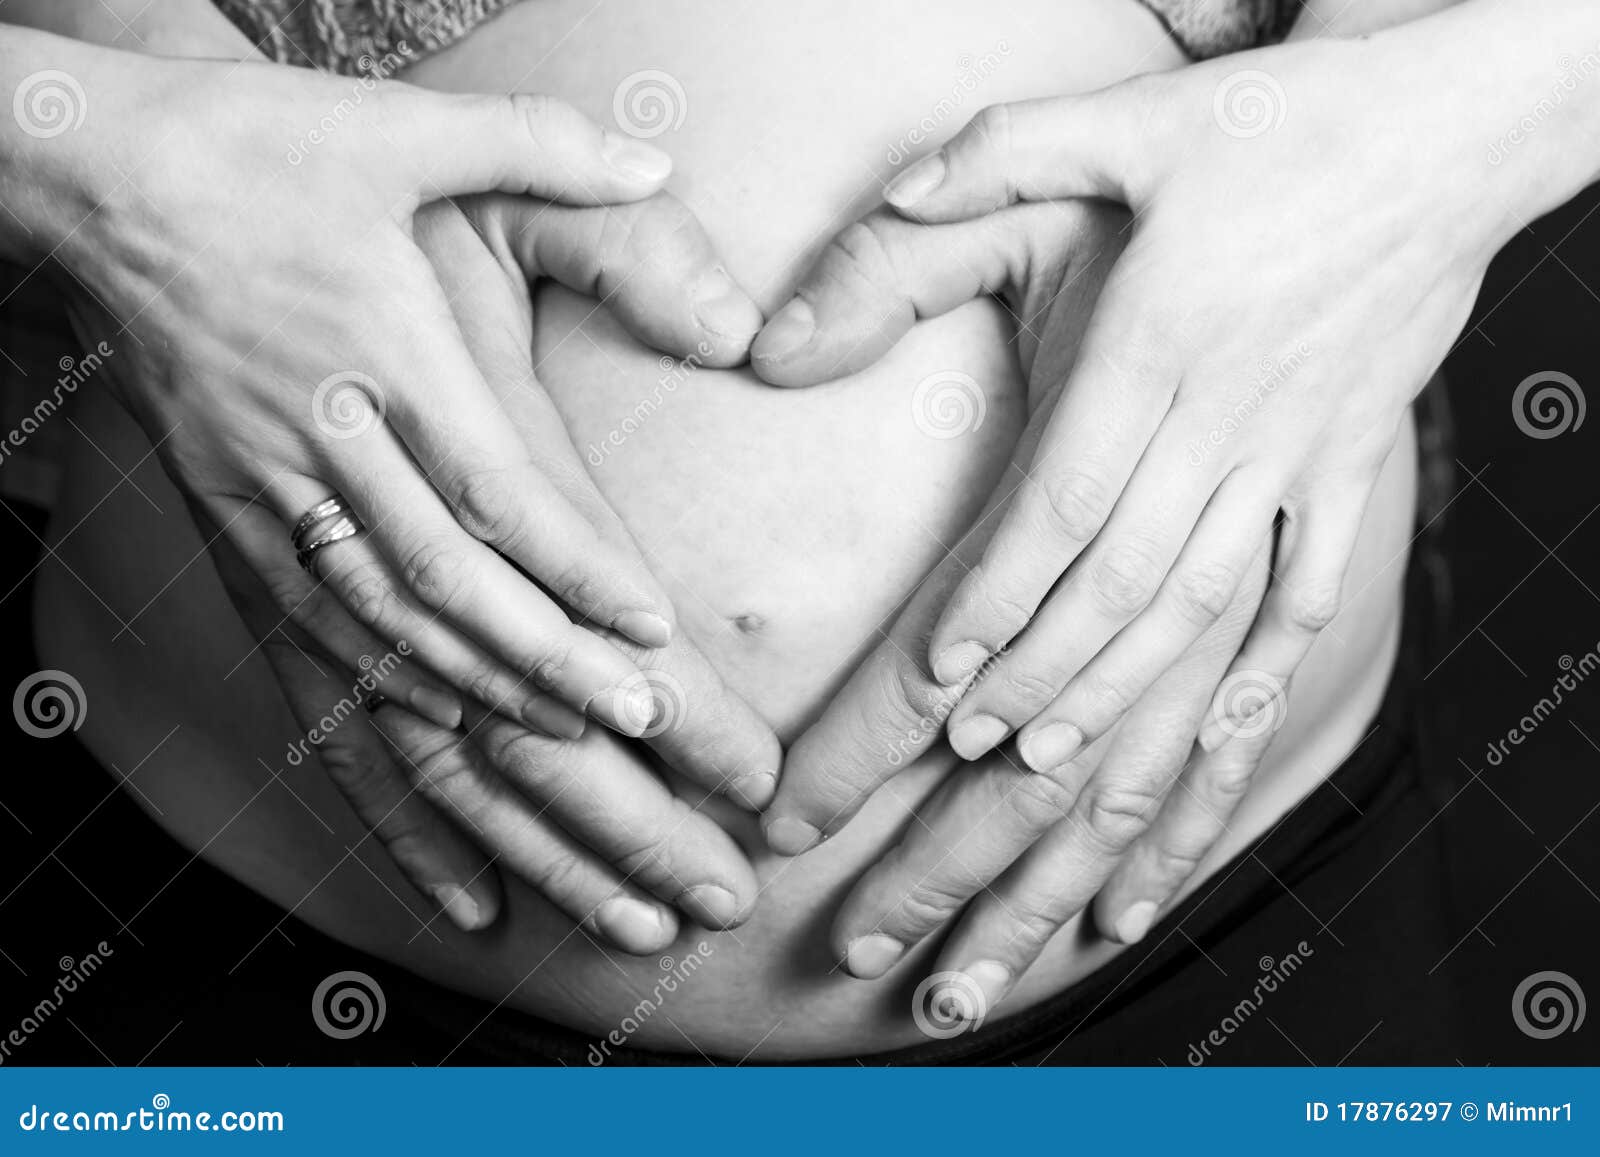 Pregnancy heart stock image. Image of birth, background - 17876297